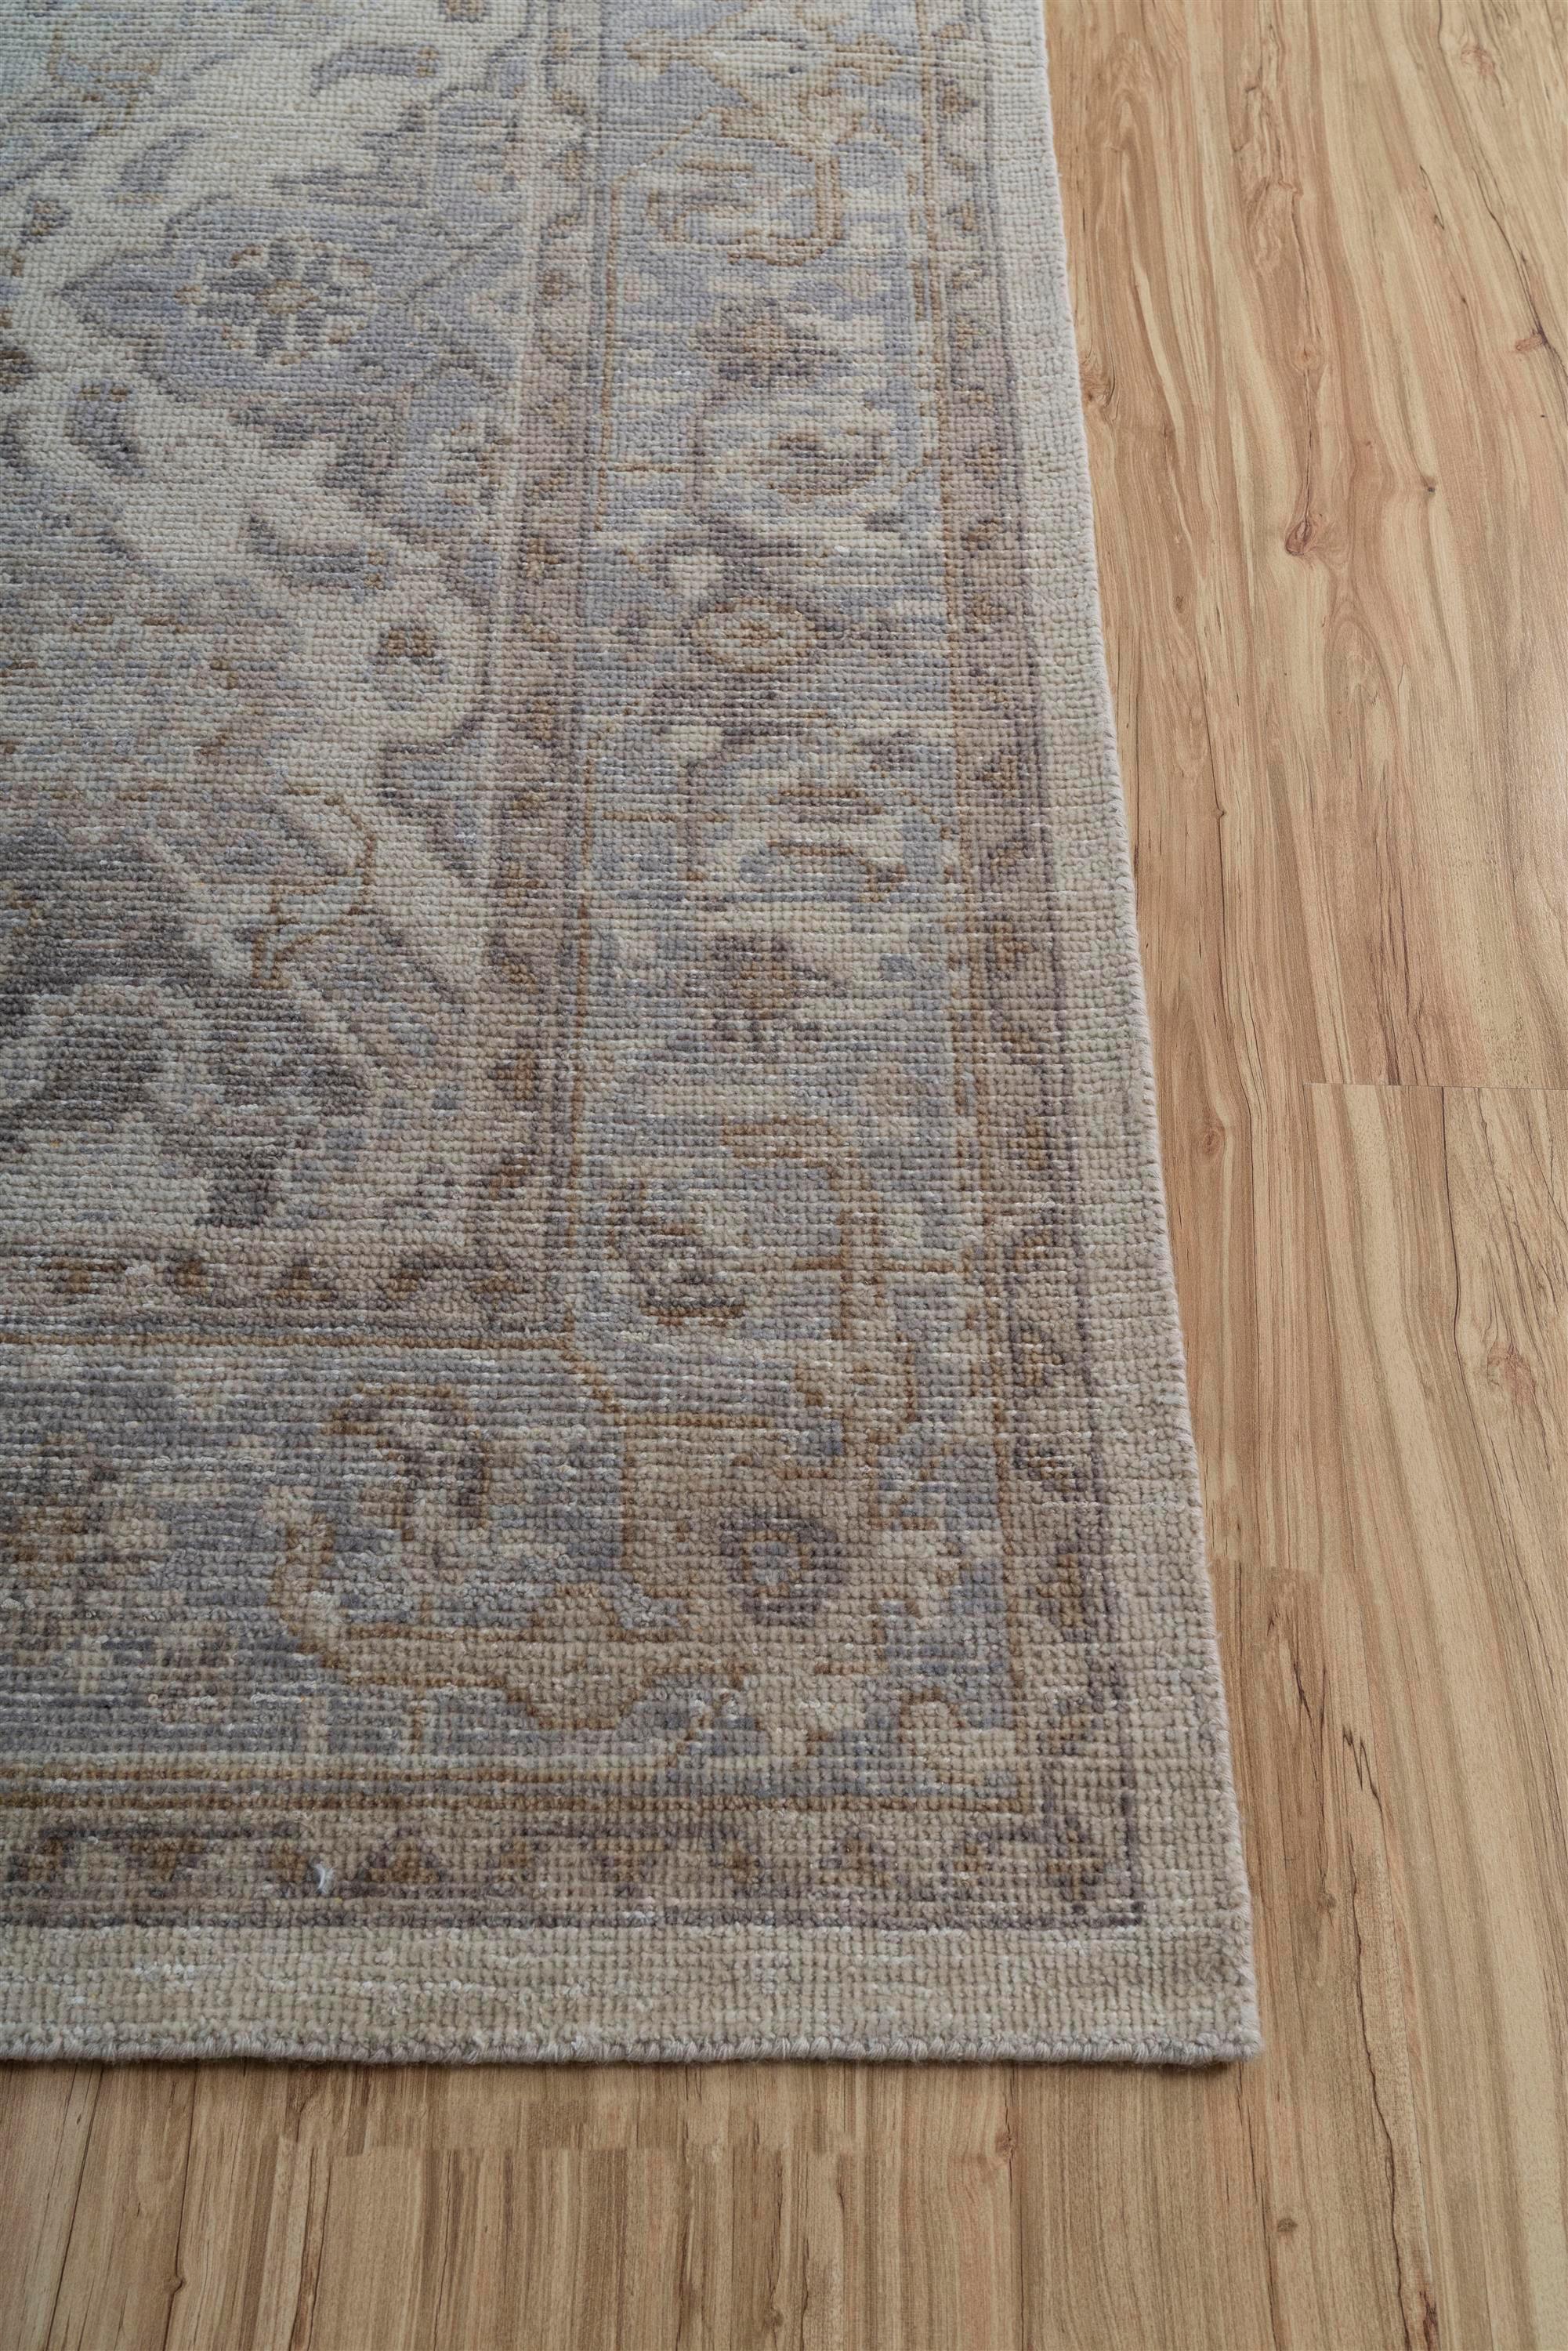 Introducing the exquisite hand-knotted rug , a masterpiece in wool craftsmanship. The rug boasts an enchanting blend of antique white as its soothing ground color, harmoniously bordered by ashwood hues. Meticulously knotted by skilled artisans, it